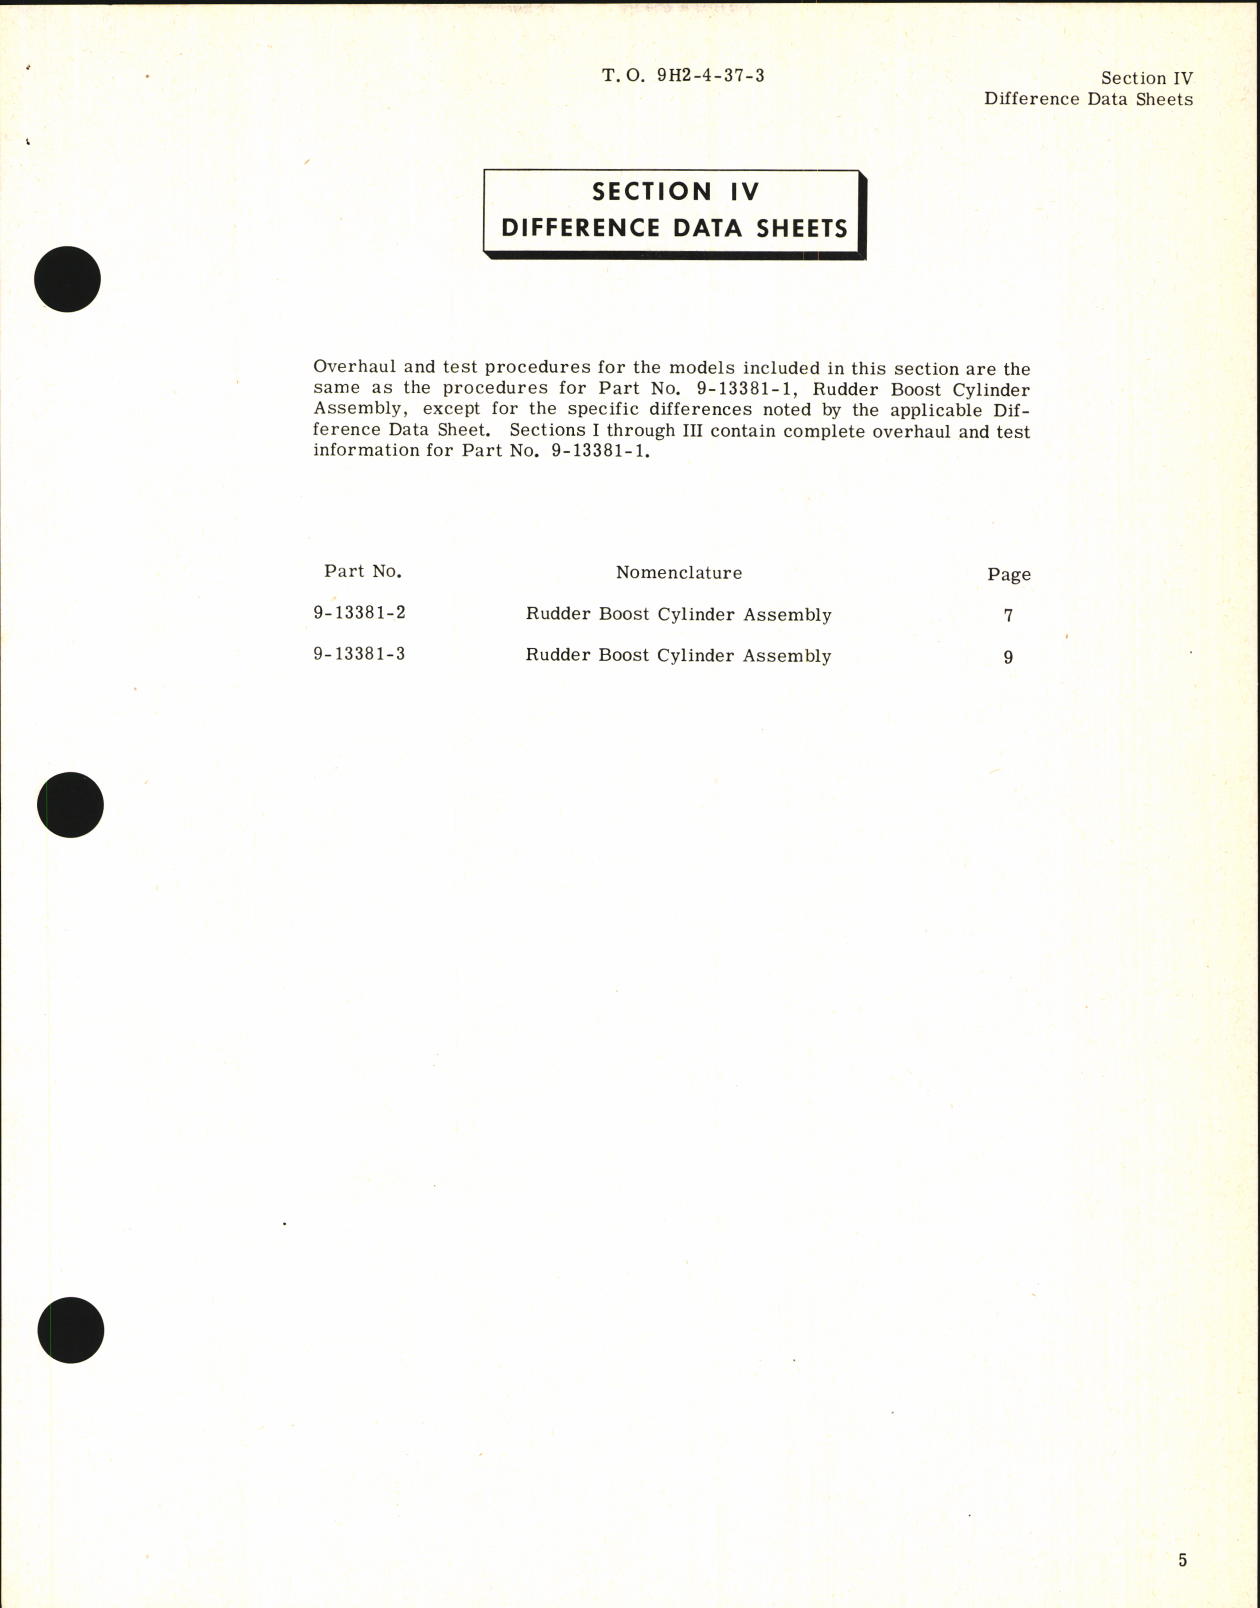 Sample page 5 from AirCorps Library document: Overhaul Instructions for Rudder Boost Cylinder Assemblies